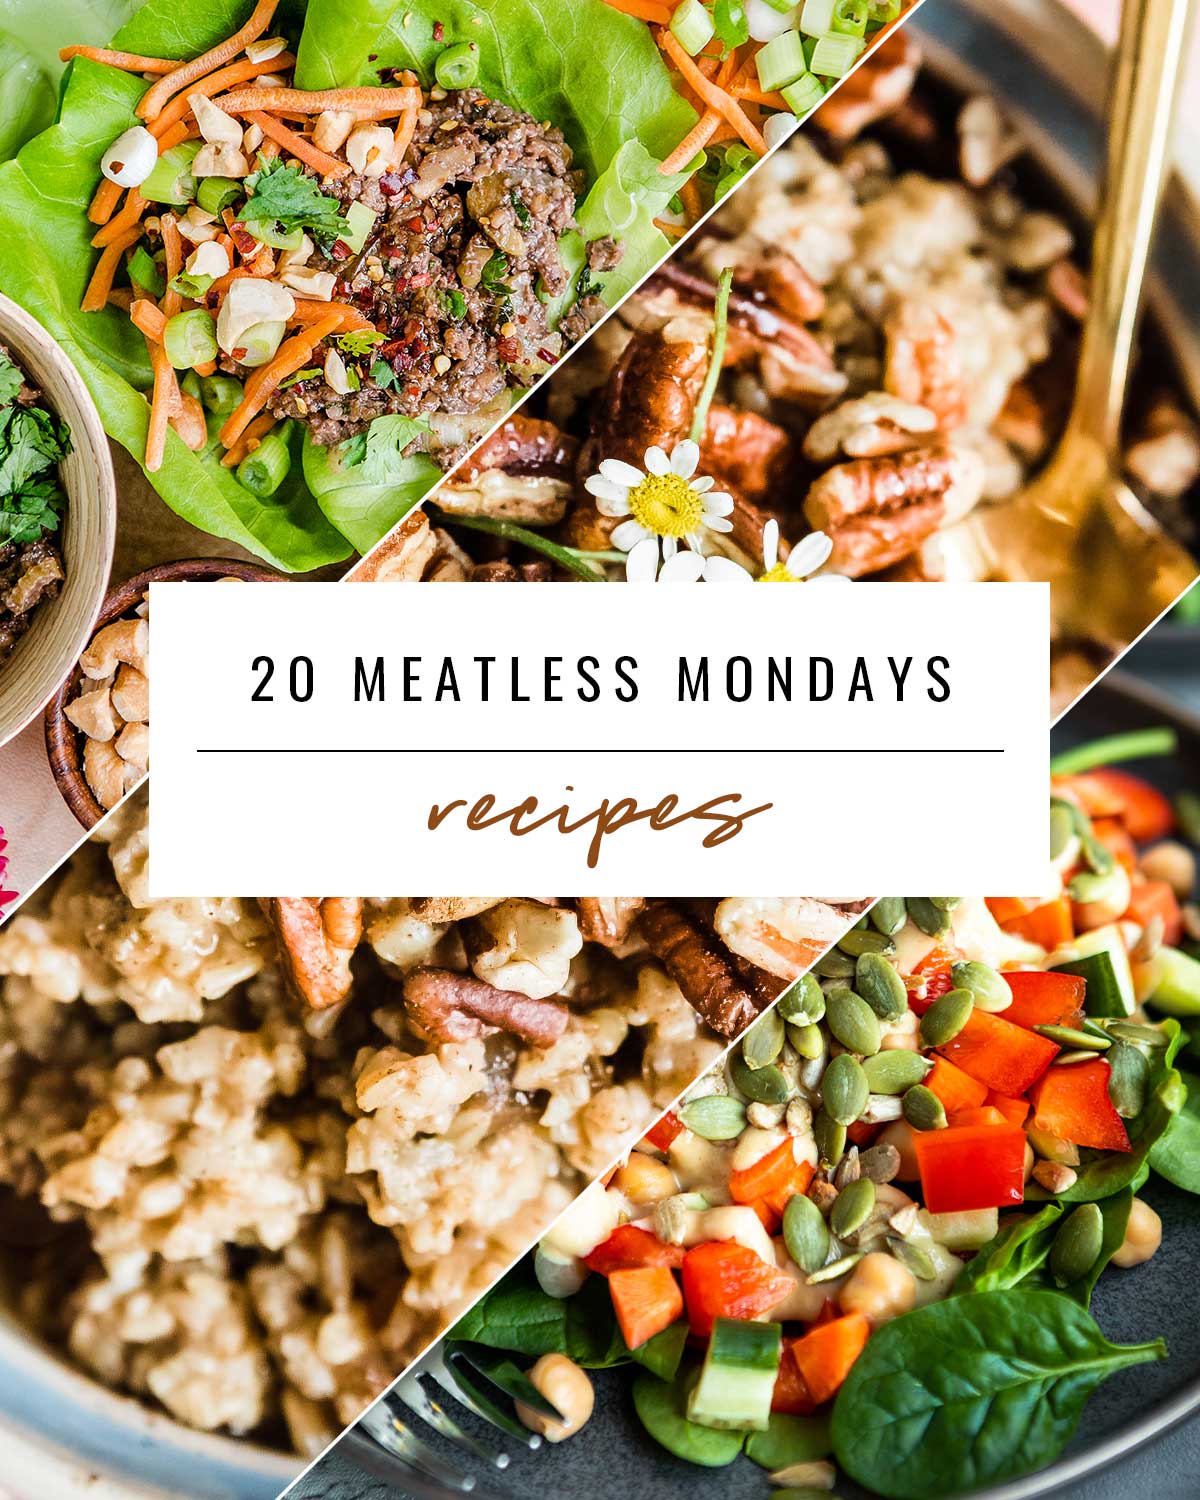 White box with text that says 20 Meatless Mondays recipes over top 3 meatless recipes.